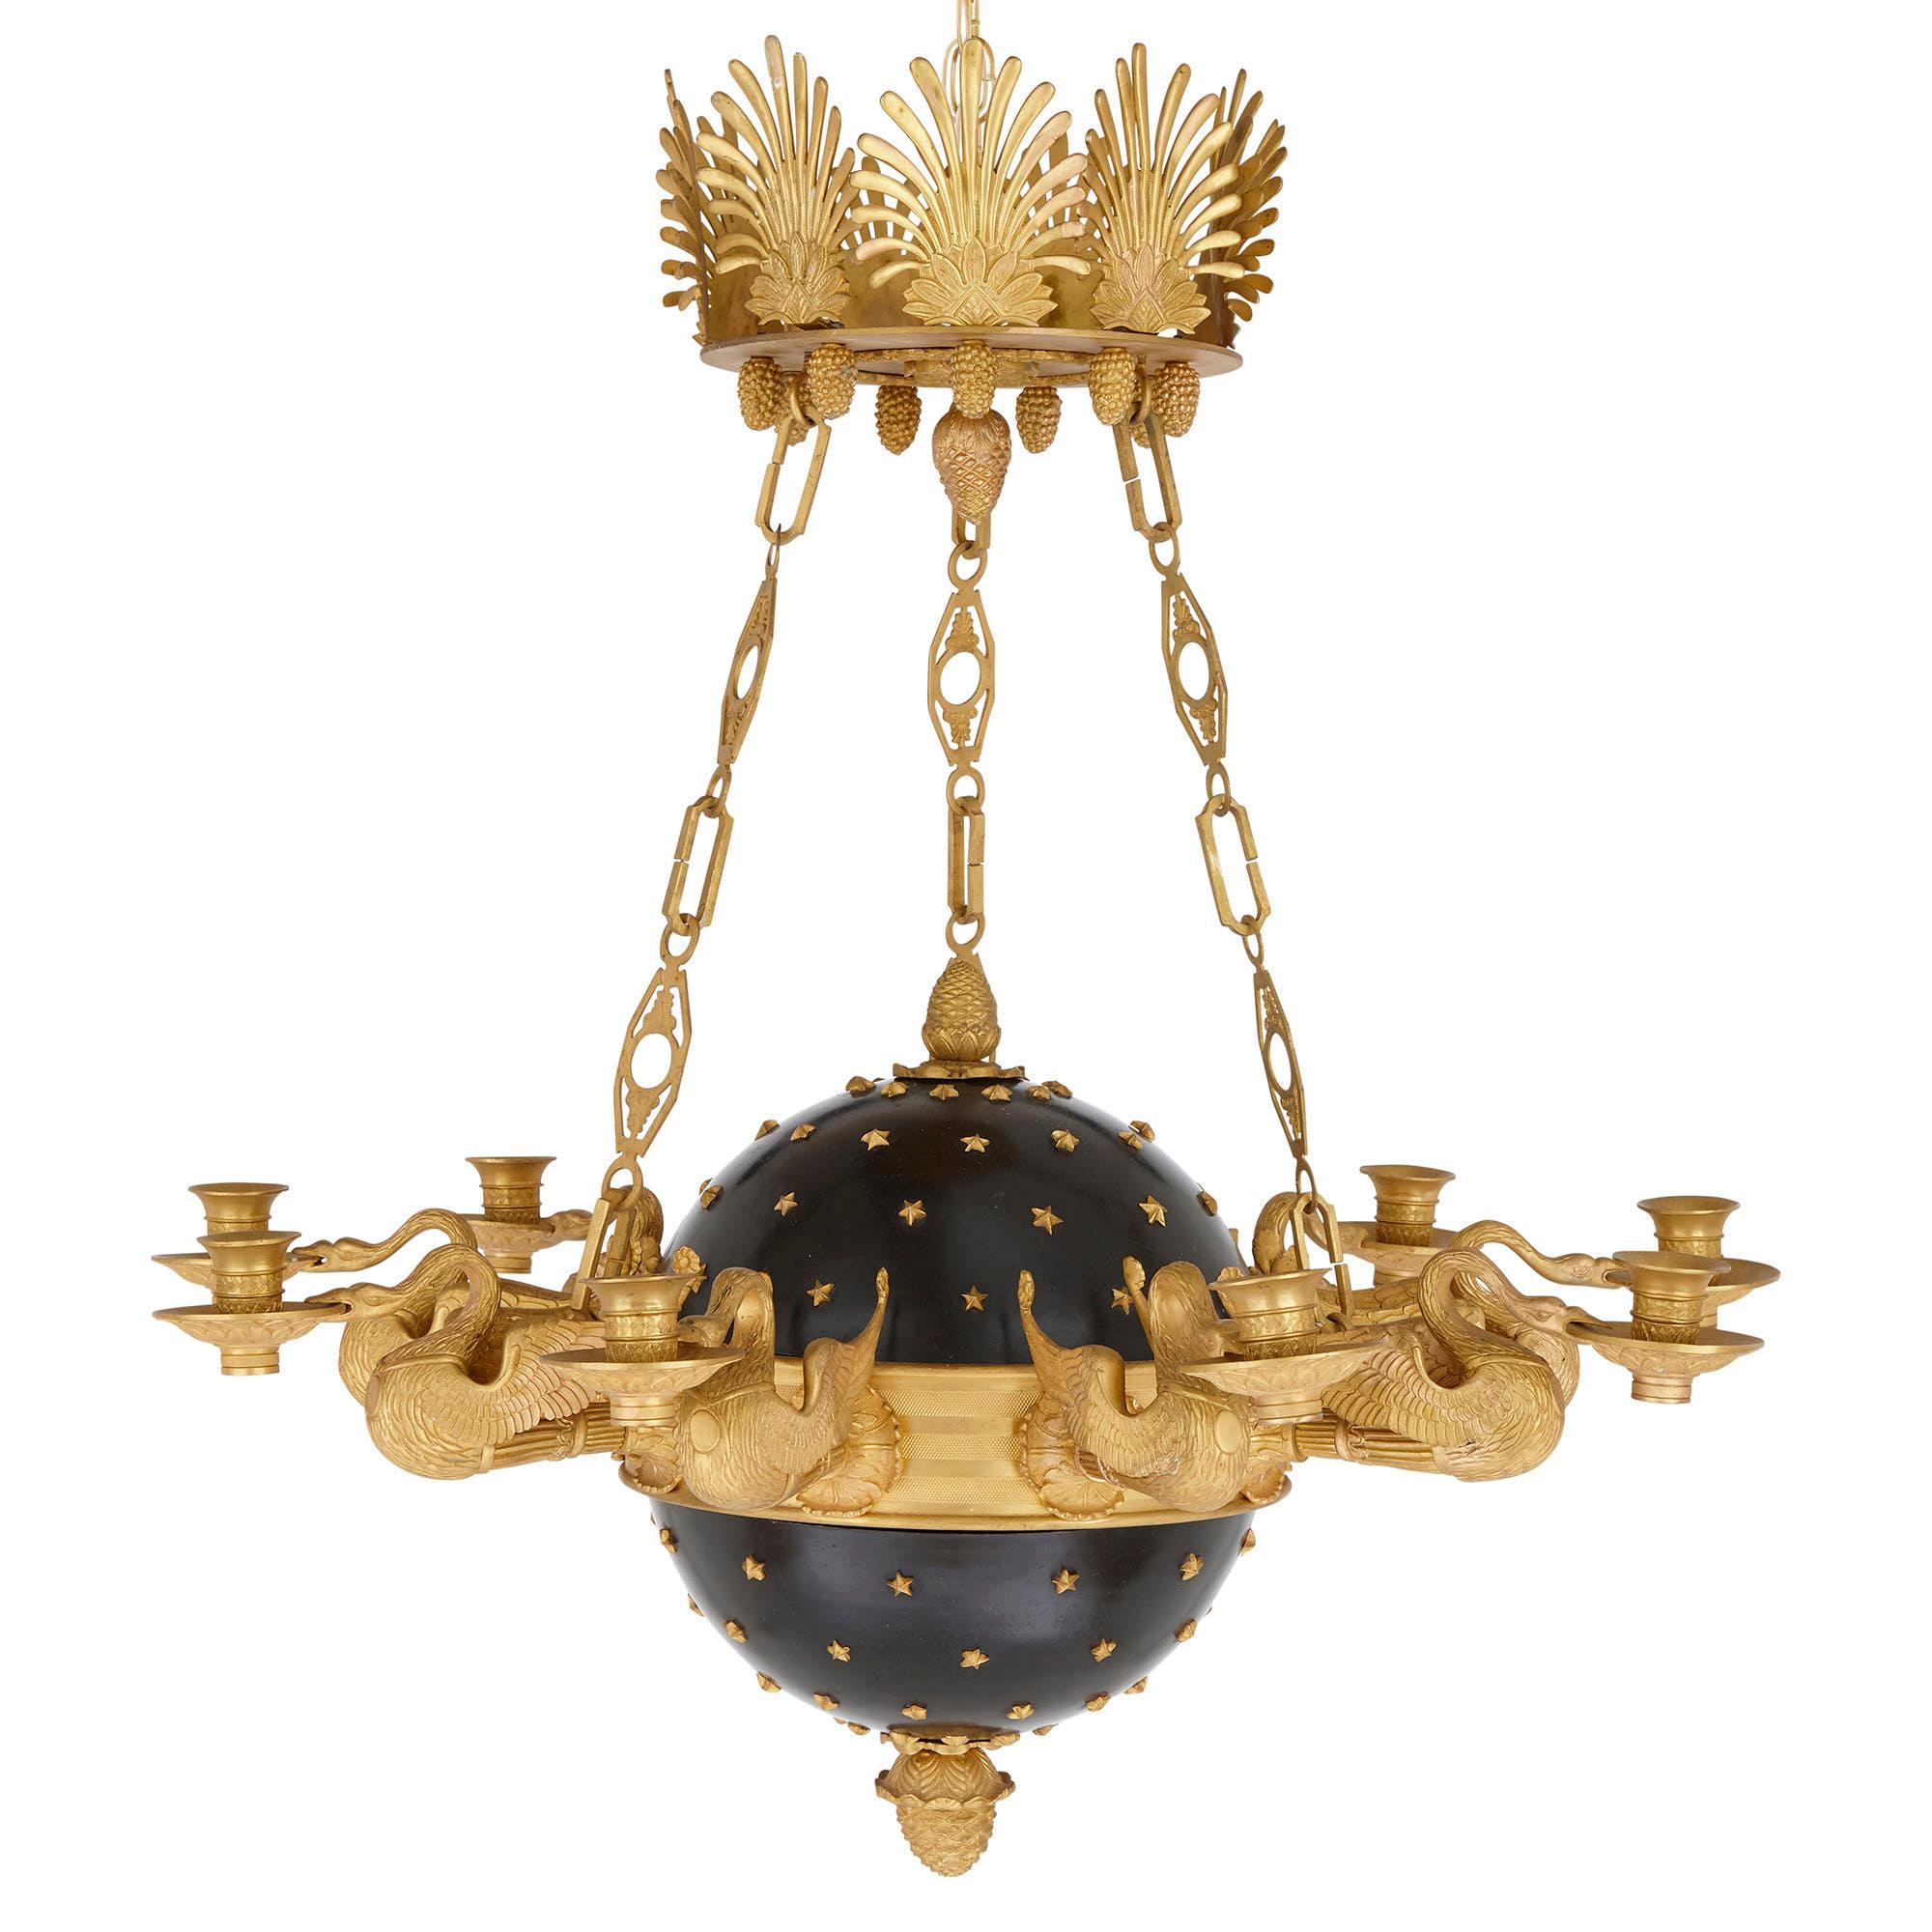 Designed to mimic the appearance of a star-studded celestial globe, theses Empire style chandeliers are simultaneously charming and outstandingly beautiful. Each chandelier is designed about a metal globe—painted black—that is studded with gilt